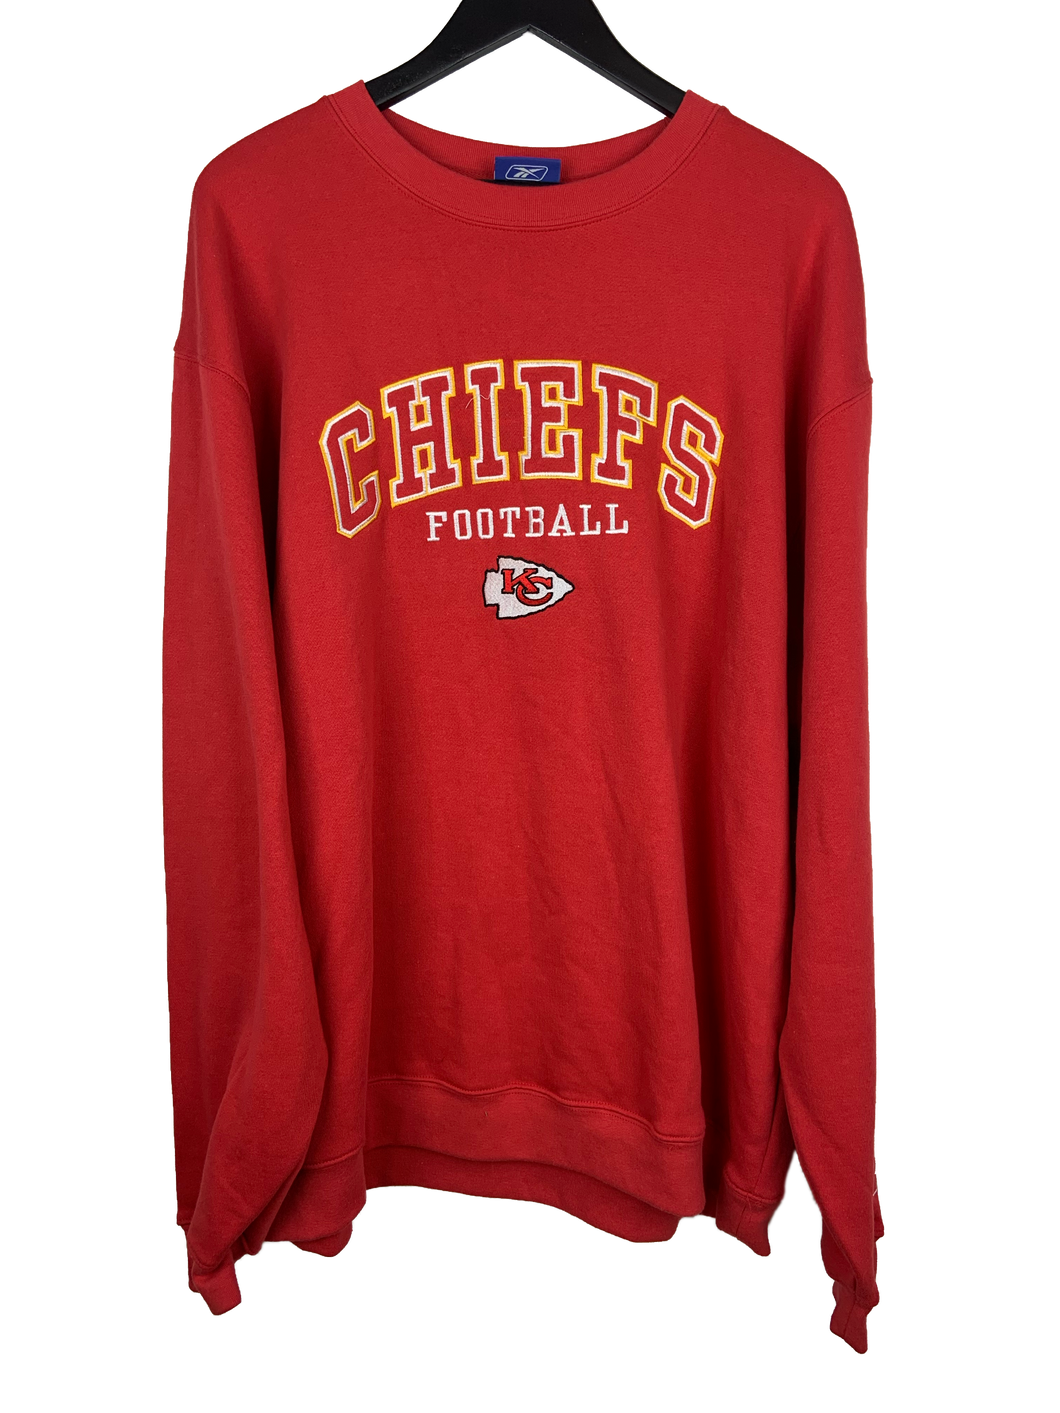 KANSAS CITY CHIEFS EMBROIDERED JUMPER - LARGE